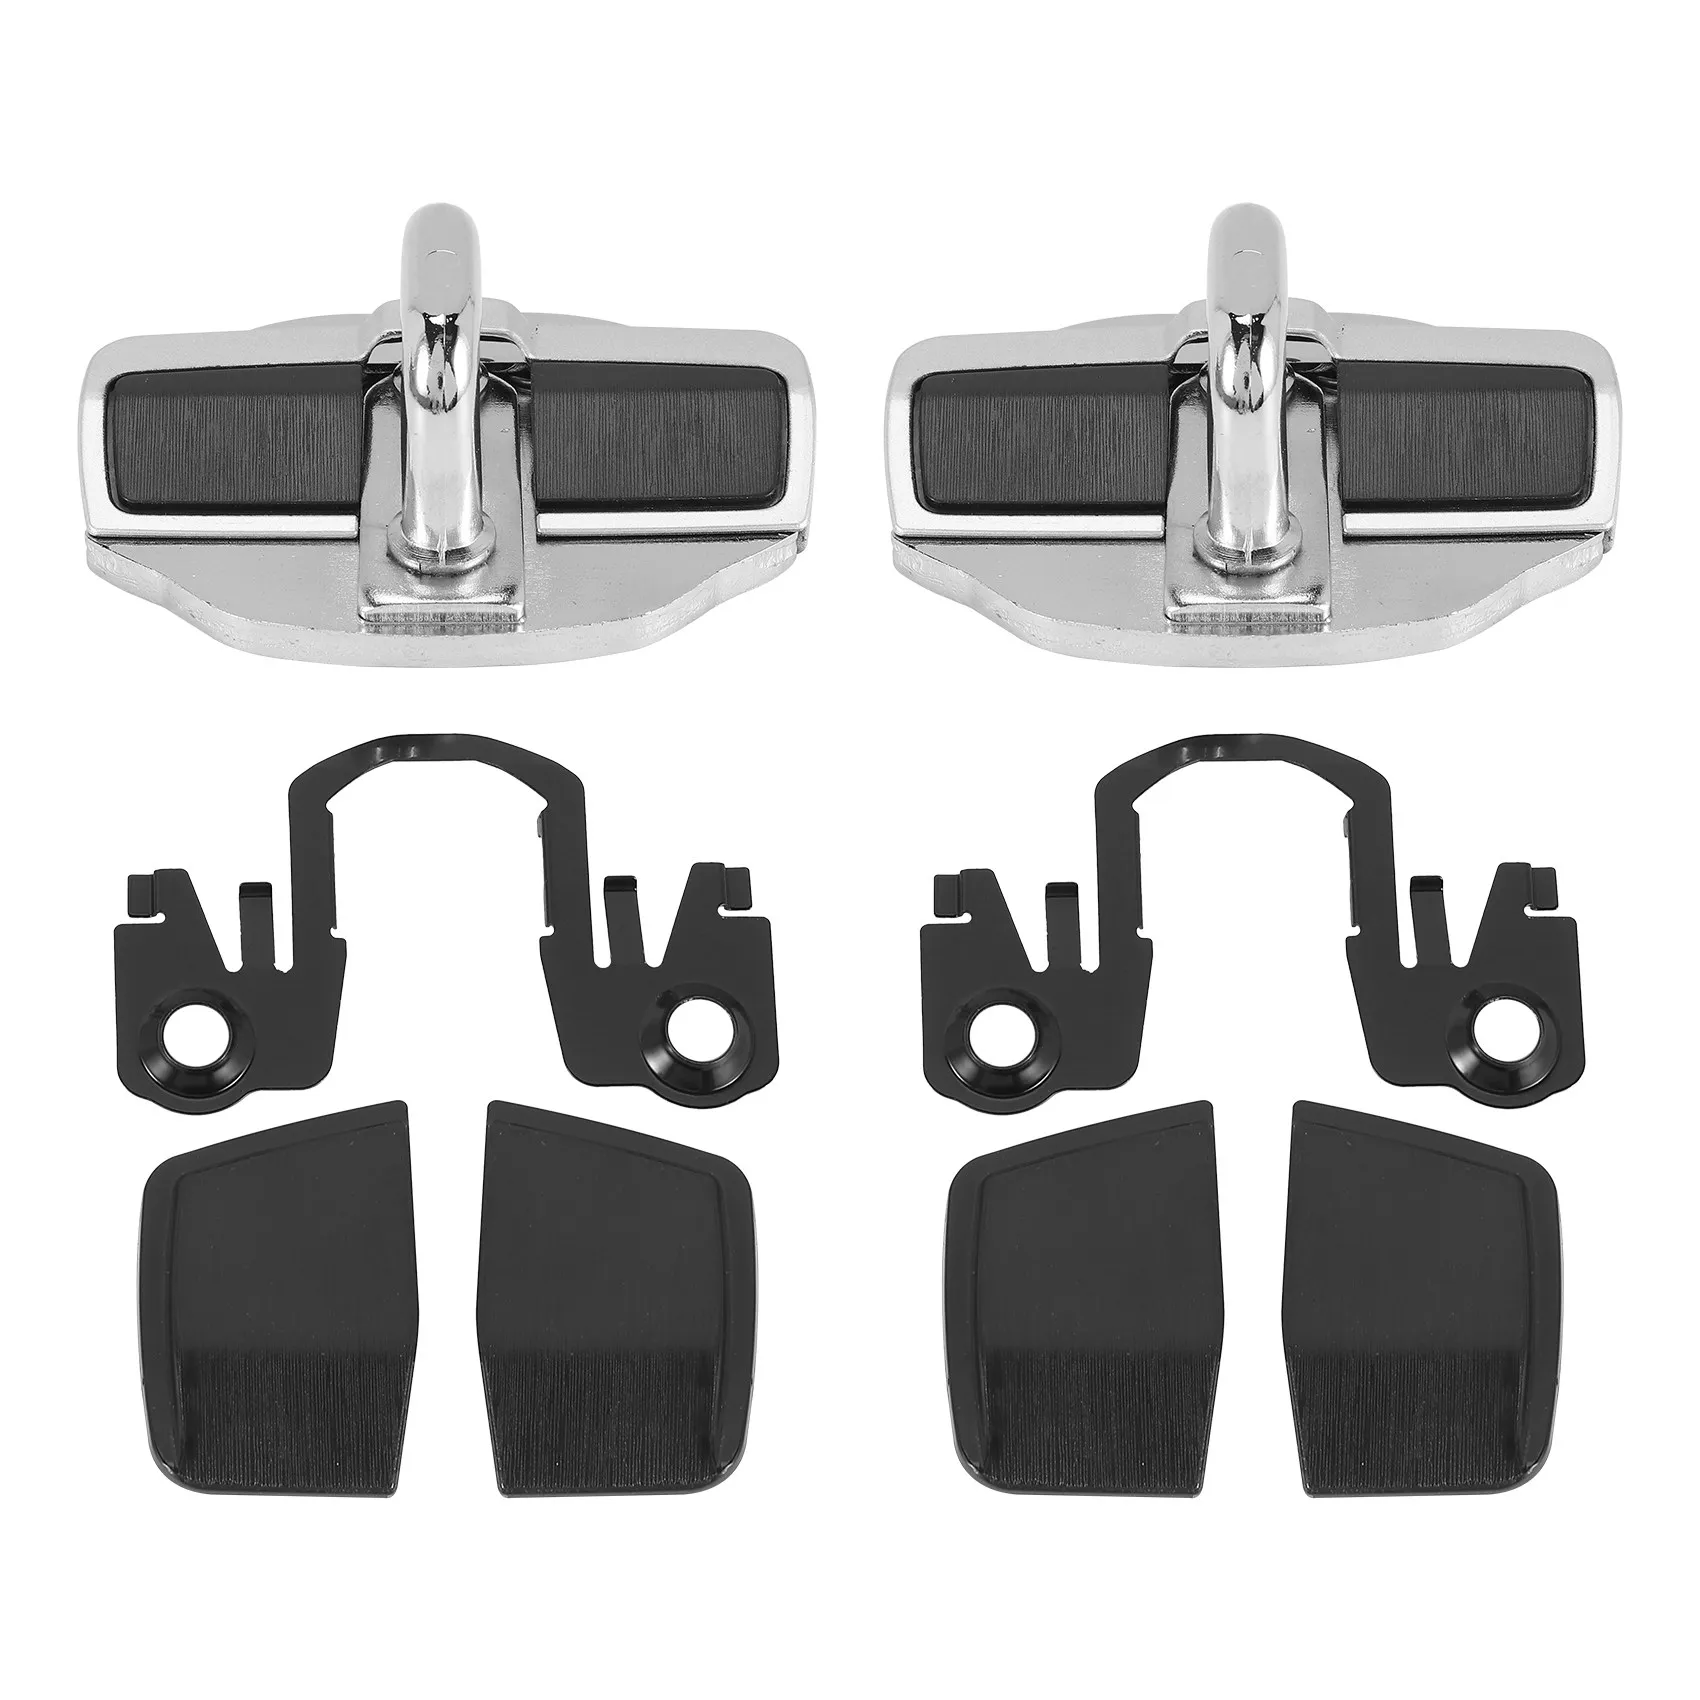 

2 Set Door Stabilizer Door Lock Protector Latches Stopper Covers for Honda Accord Civic CRV HRV Odyssey